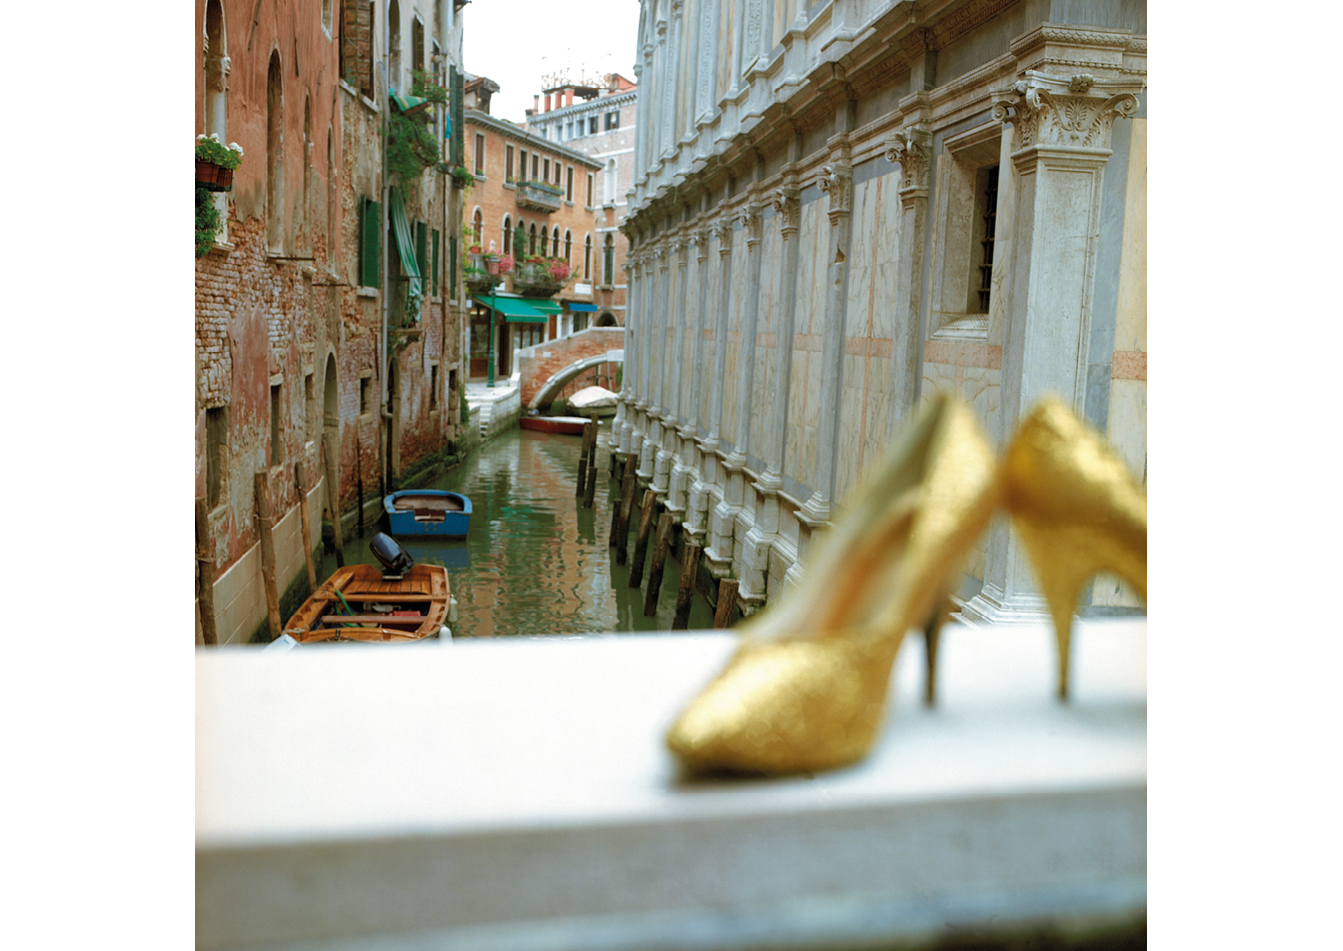 Image of scene in Venice. The background shows two buildings with a canal in in the middle. The foreground shows the ledge of a balcony that has two gold heels rest on top.